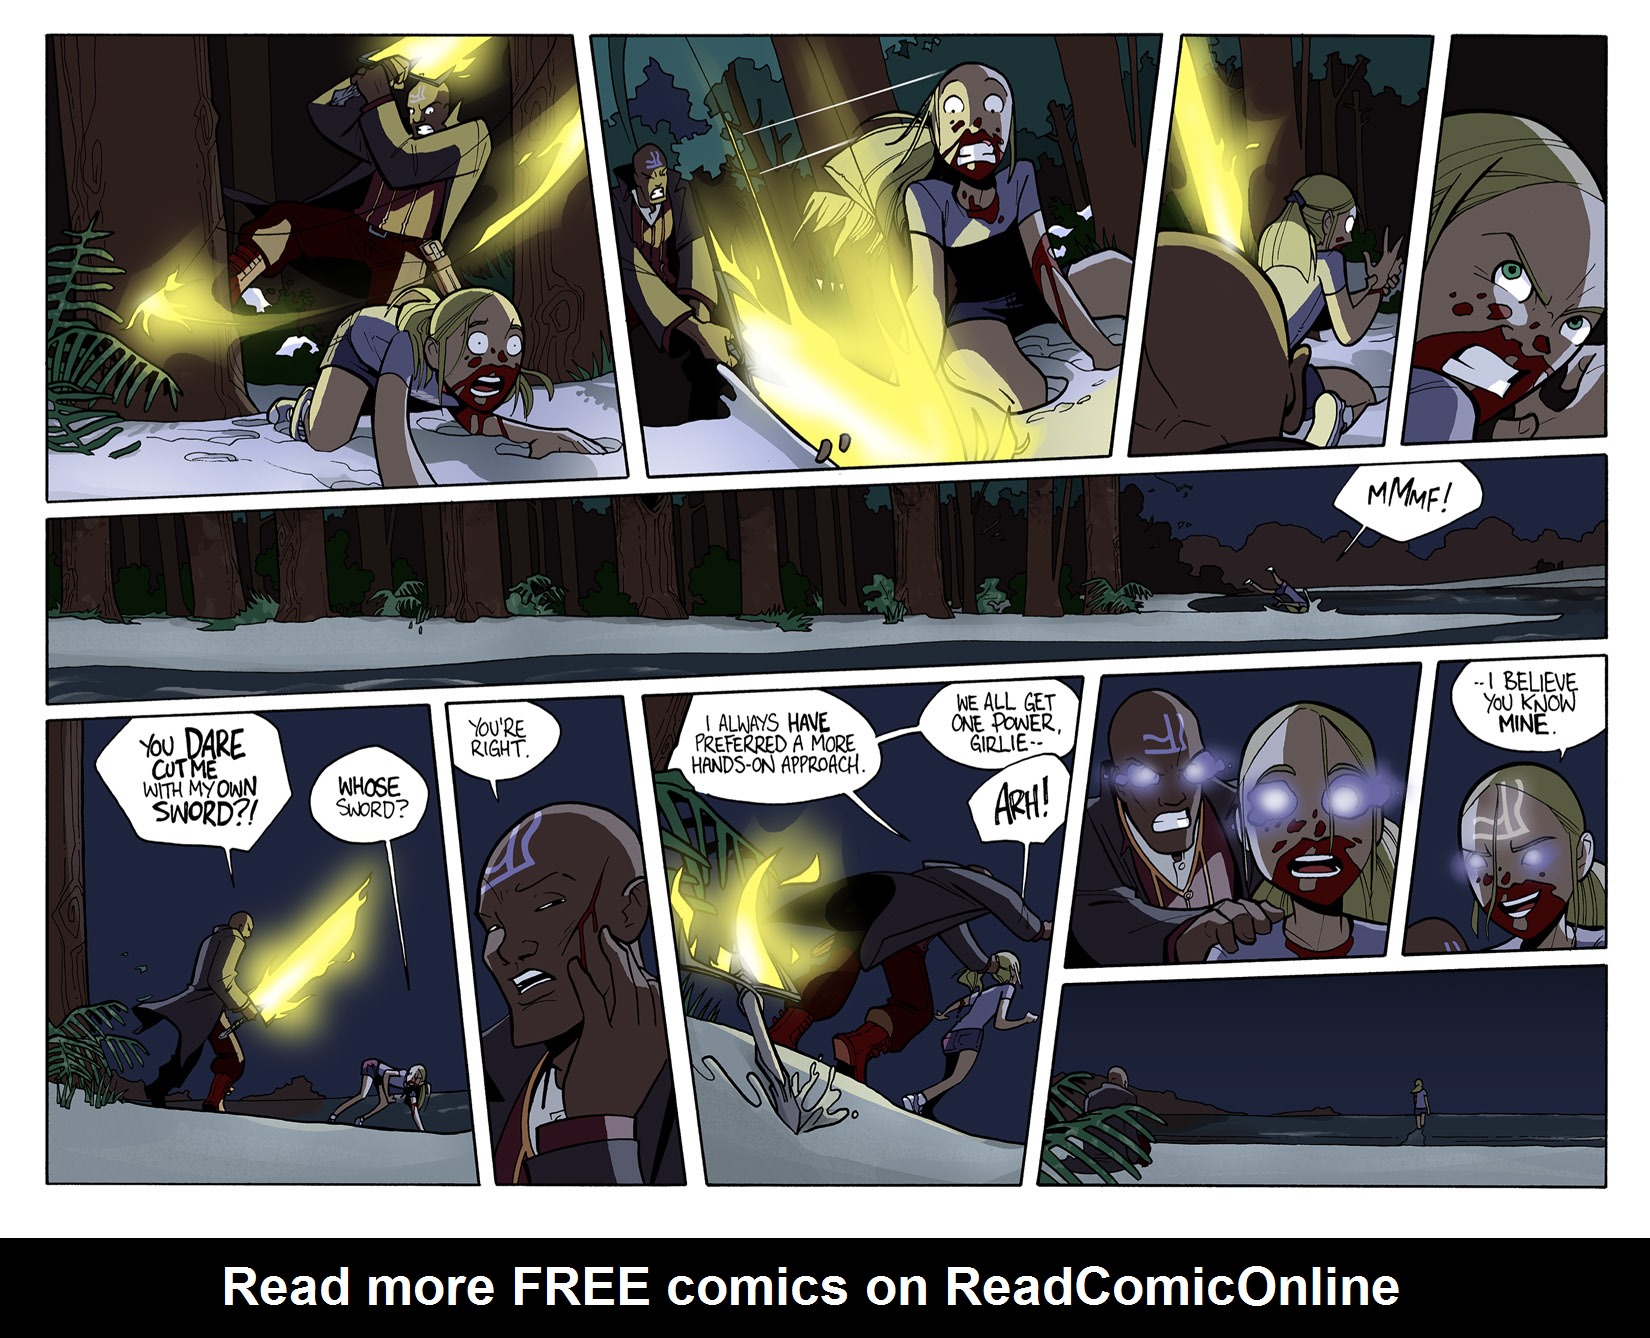 Read online Celadore comic -  Issue #9 - 12